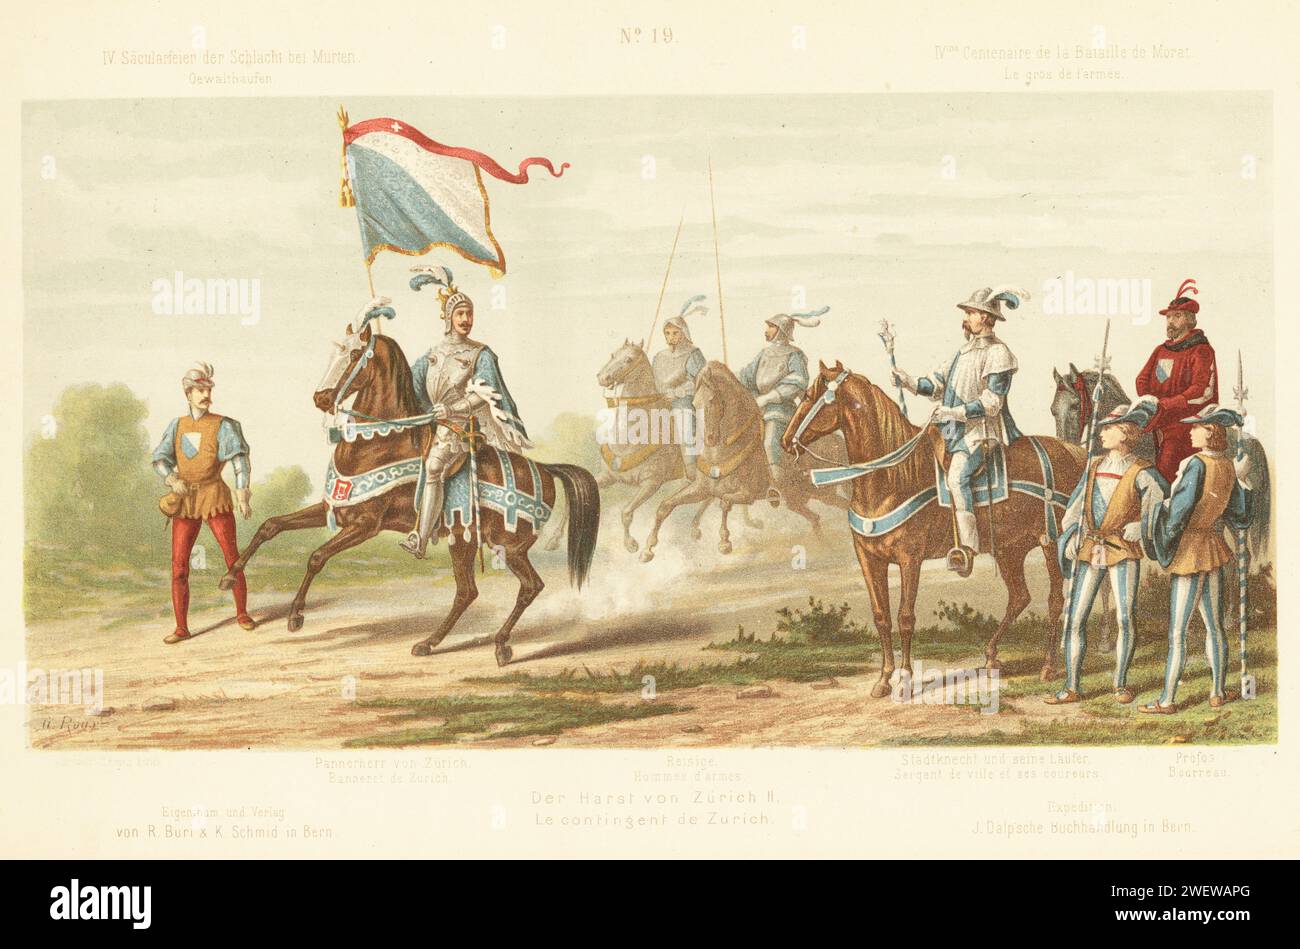 Zurich contingent: Pannerherr (standard bearer), men-at-arms, Stadtknecht (town sergeant) and his couriers, and Profos (executioner). Chromolithograph by C. Knusli after an illustration by Gustav Roux from Album du Cortege Historique de Morat, reenactment pageant on the 400th anniversary of the Battle of Murten, Buri, Zurich, 1876. Stock Photo